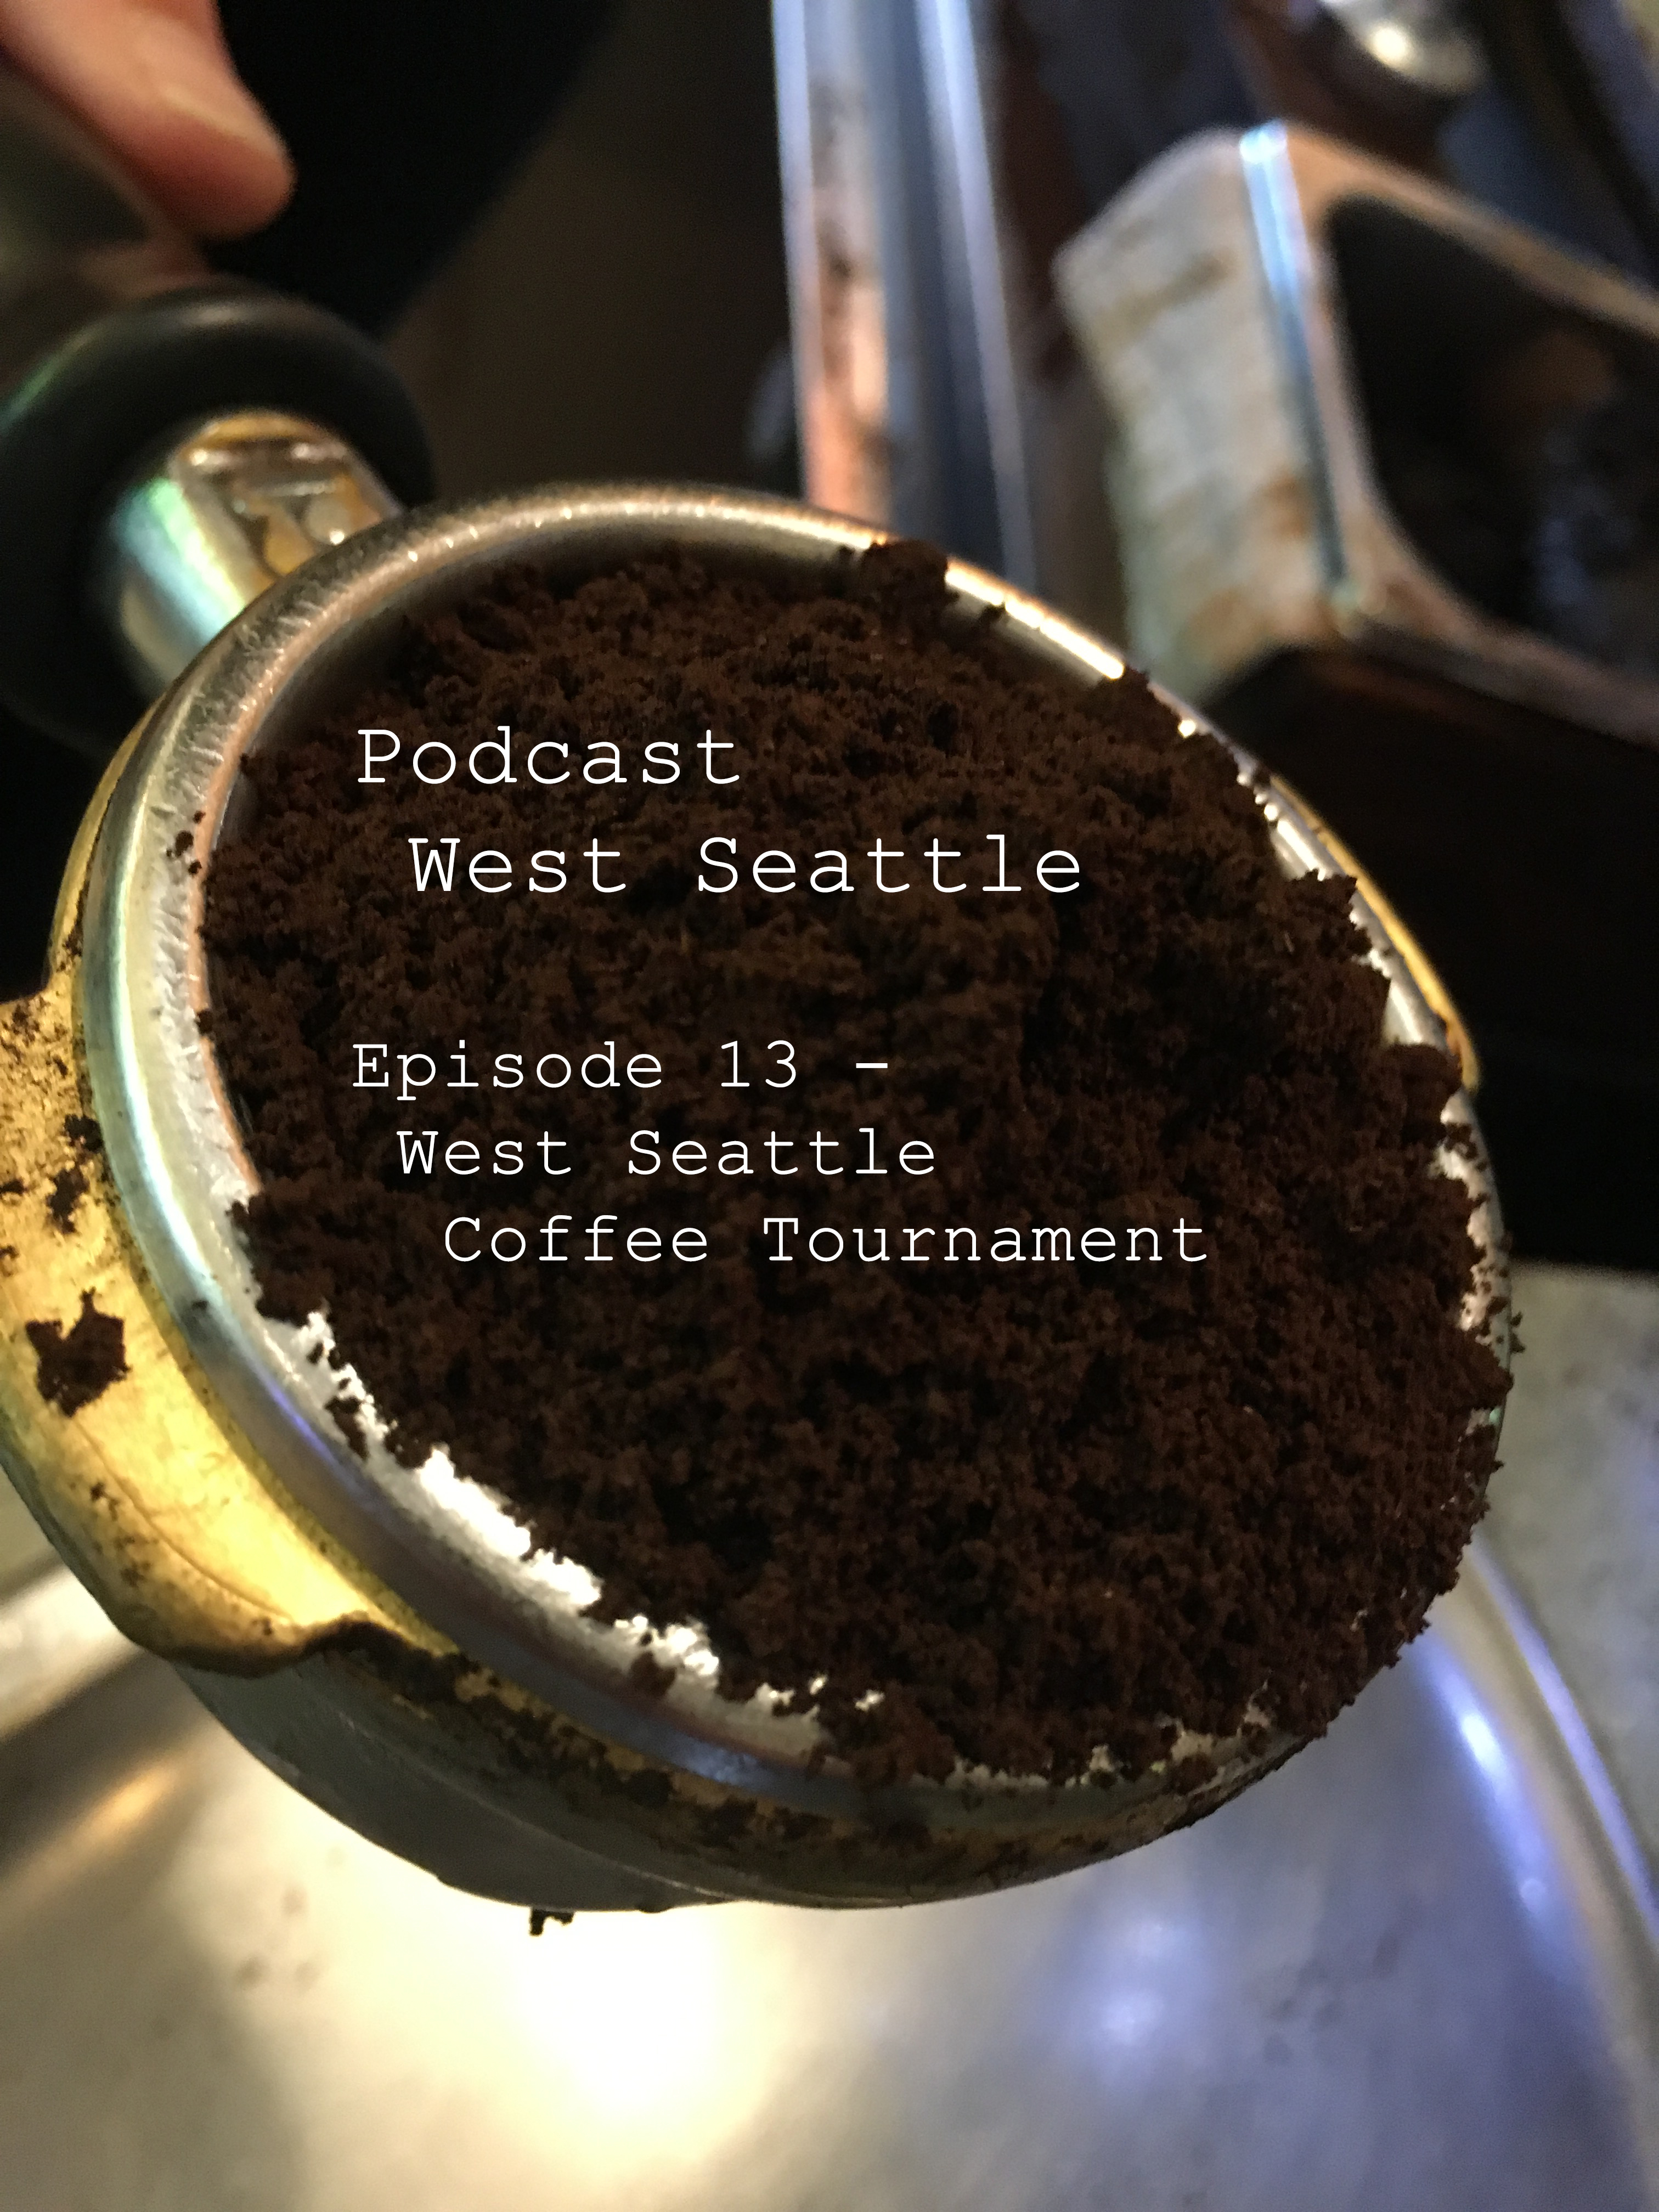 Episode 13 - West Seattle Coffee Tournament